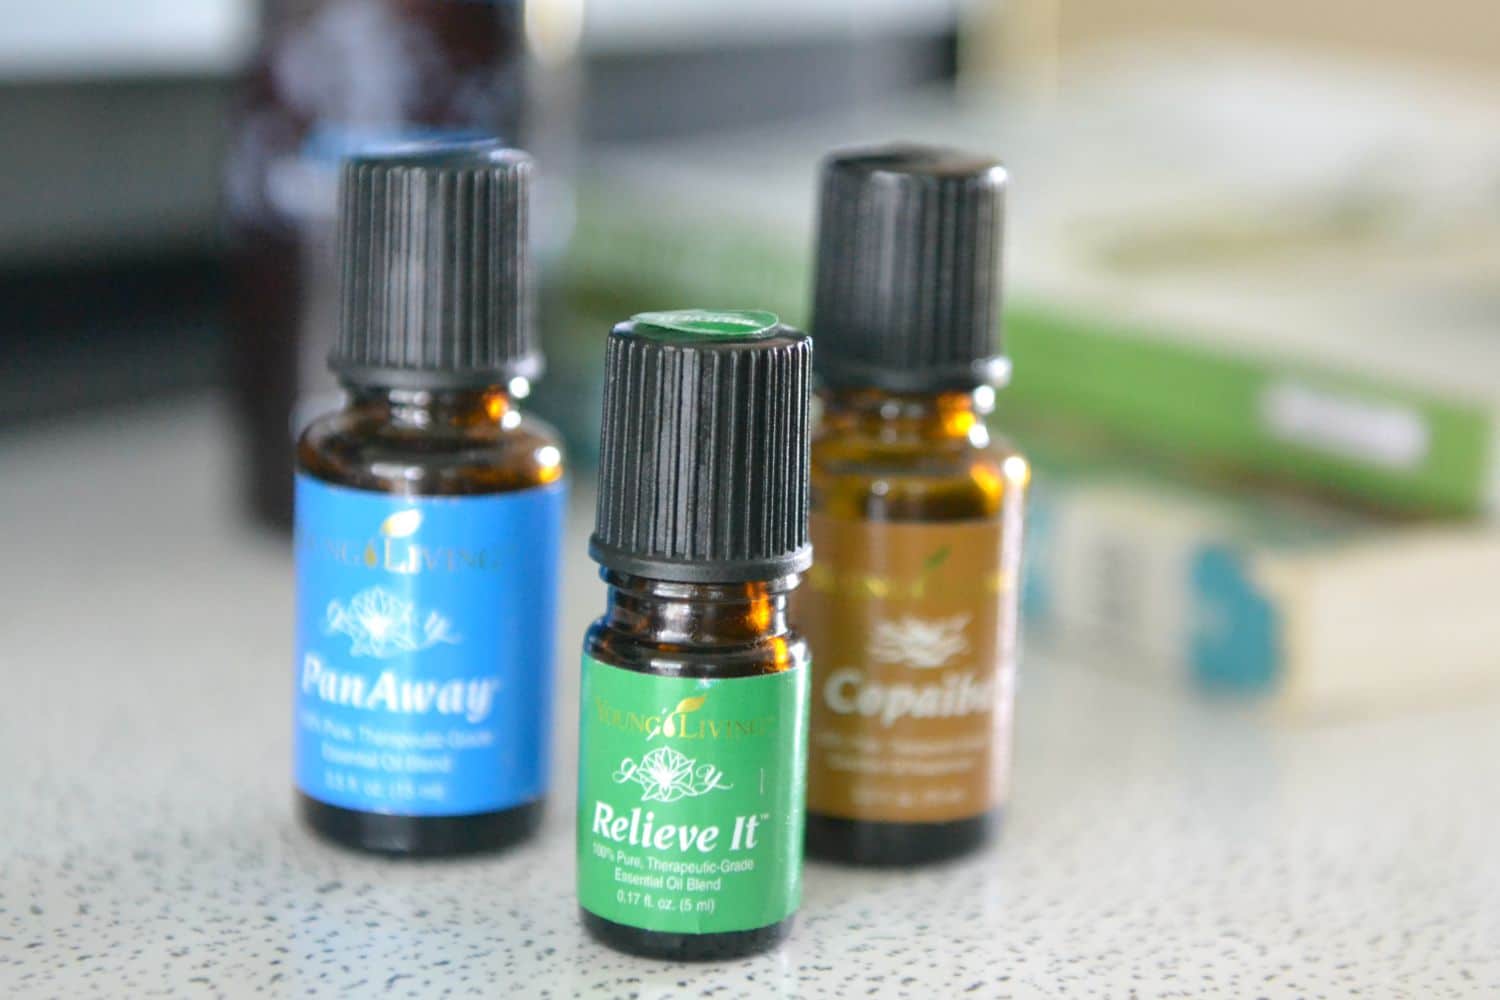 10 Must Have Essential Oils for Health⎢10 Must Have Essential Oils for Your Medicine Cabinet⎢Young Living⎢First Aid Kit⎢Natural Remedies⎢Health and Wellness